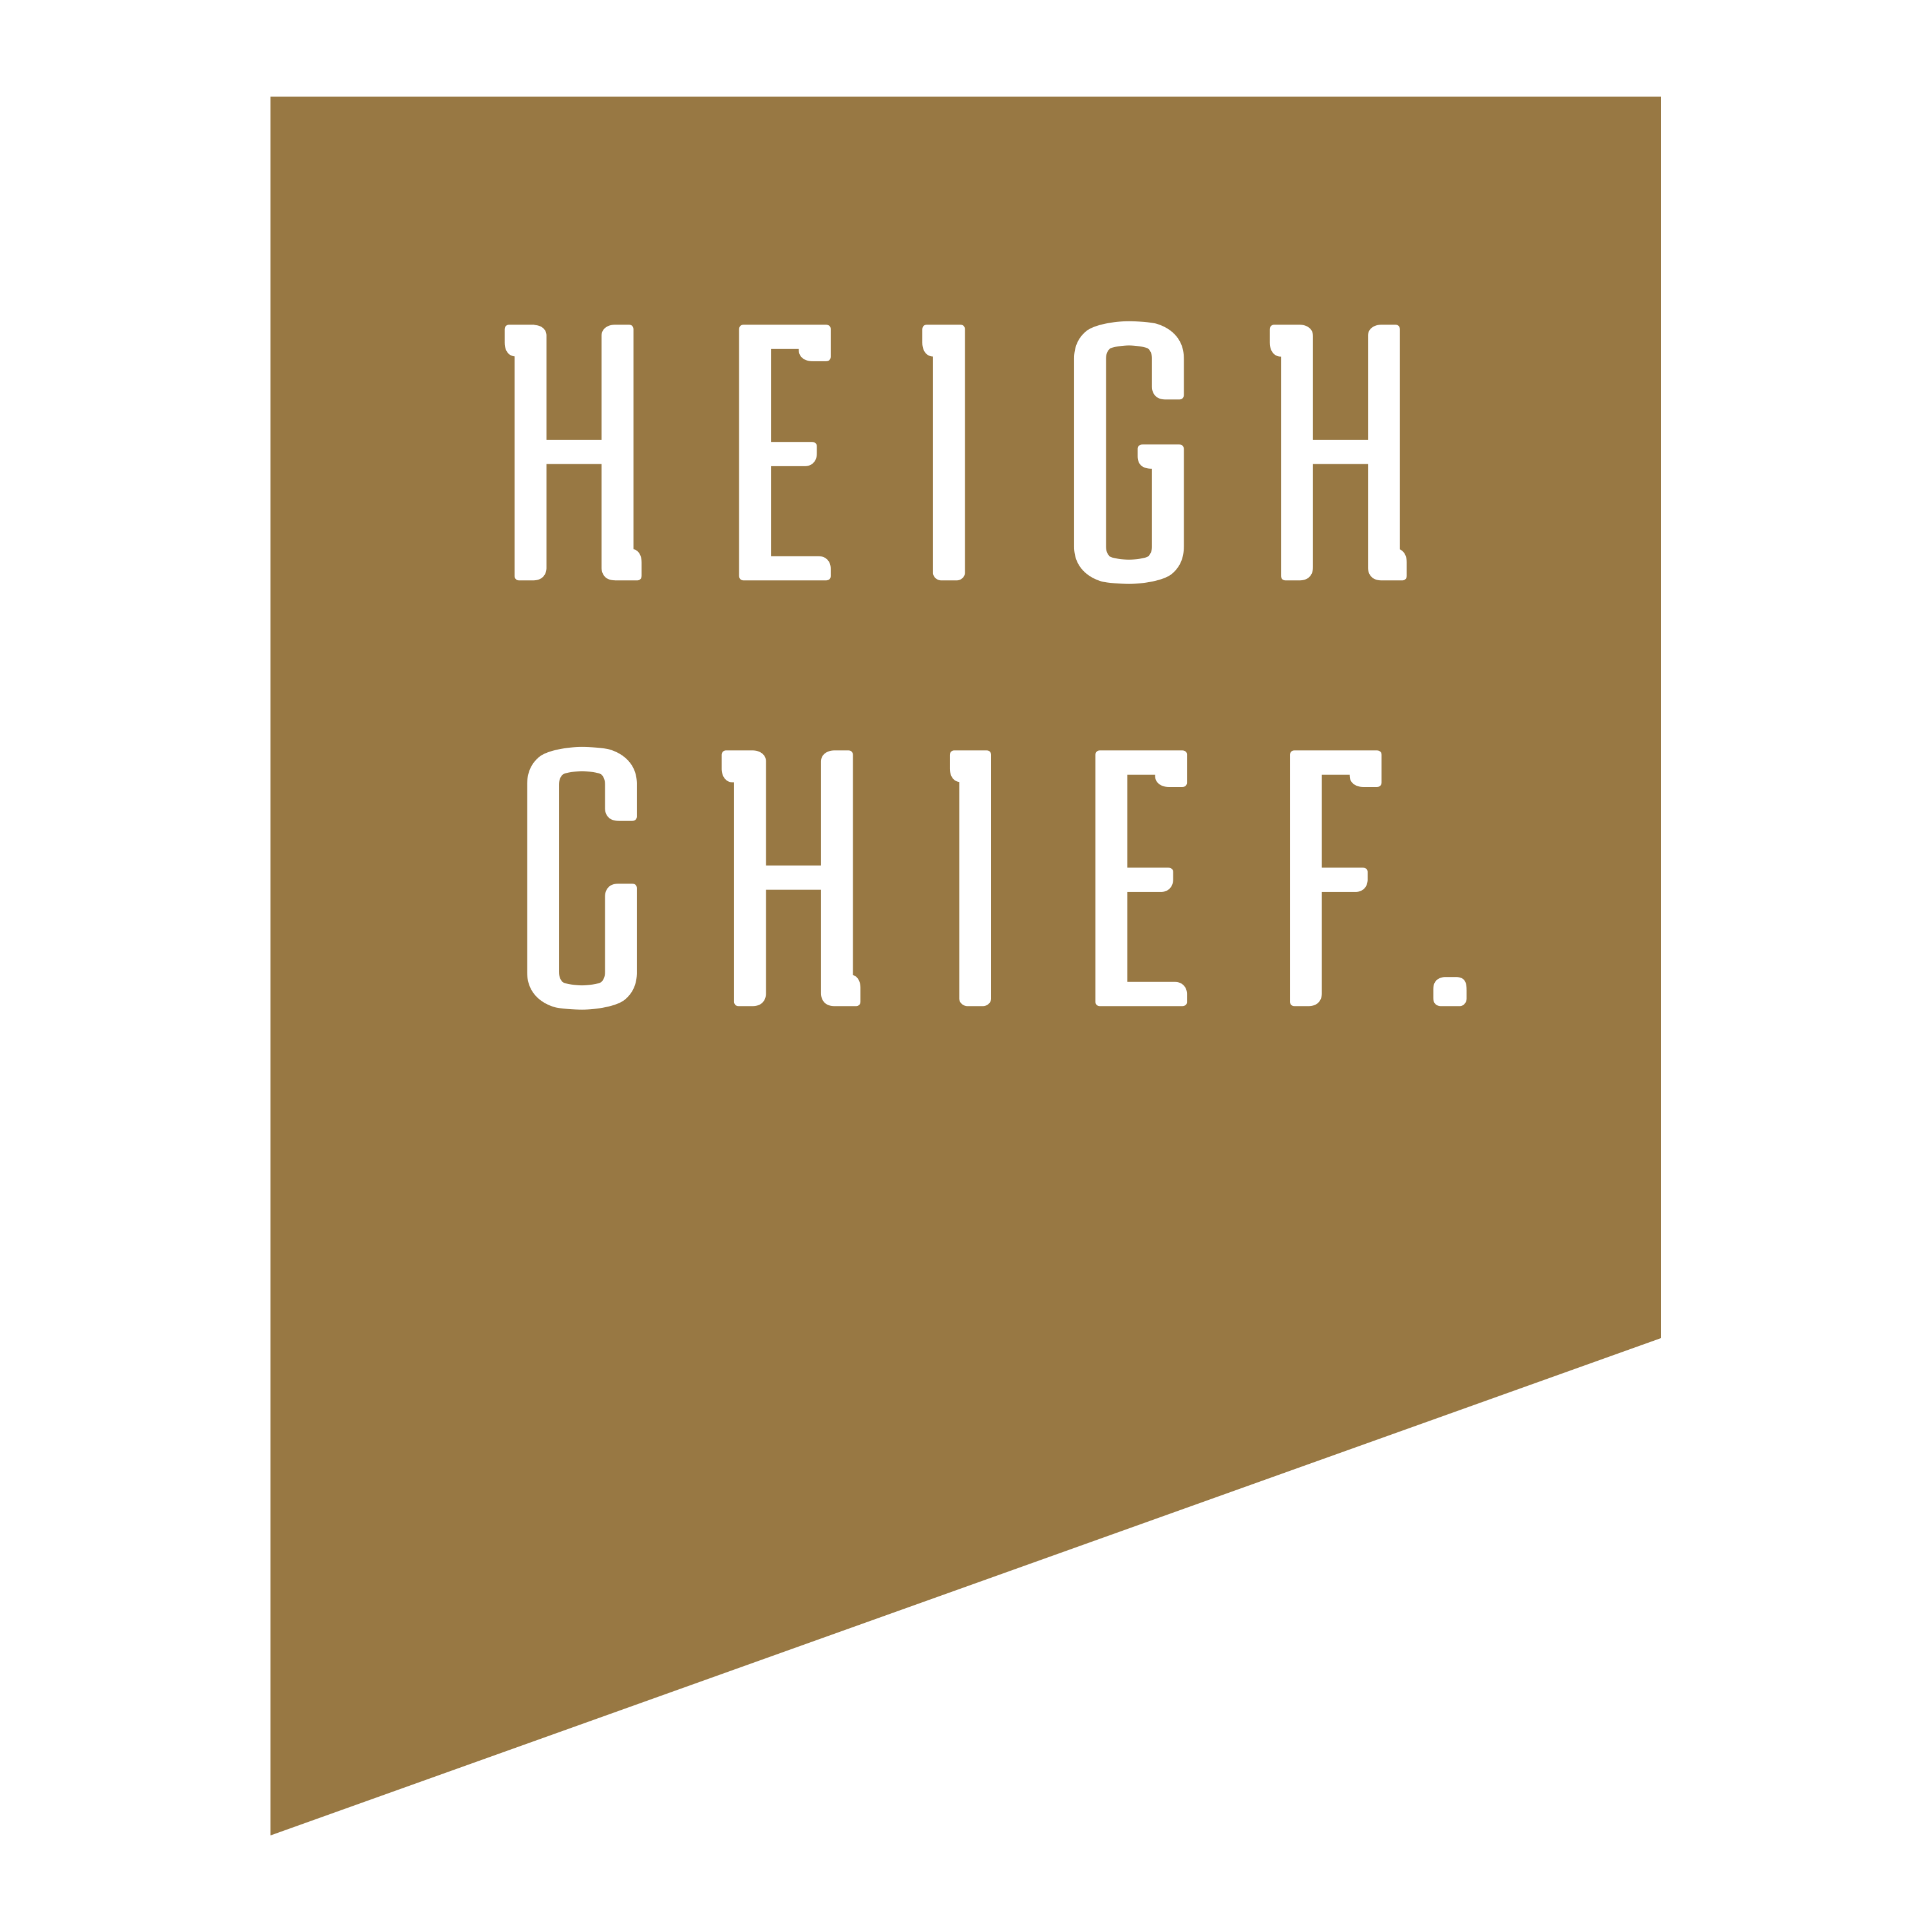 Heigh Chief.